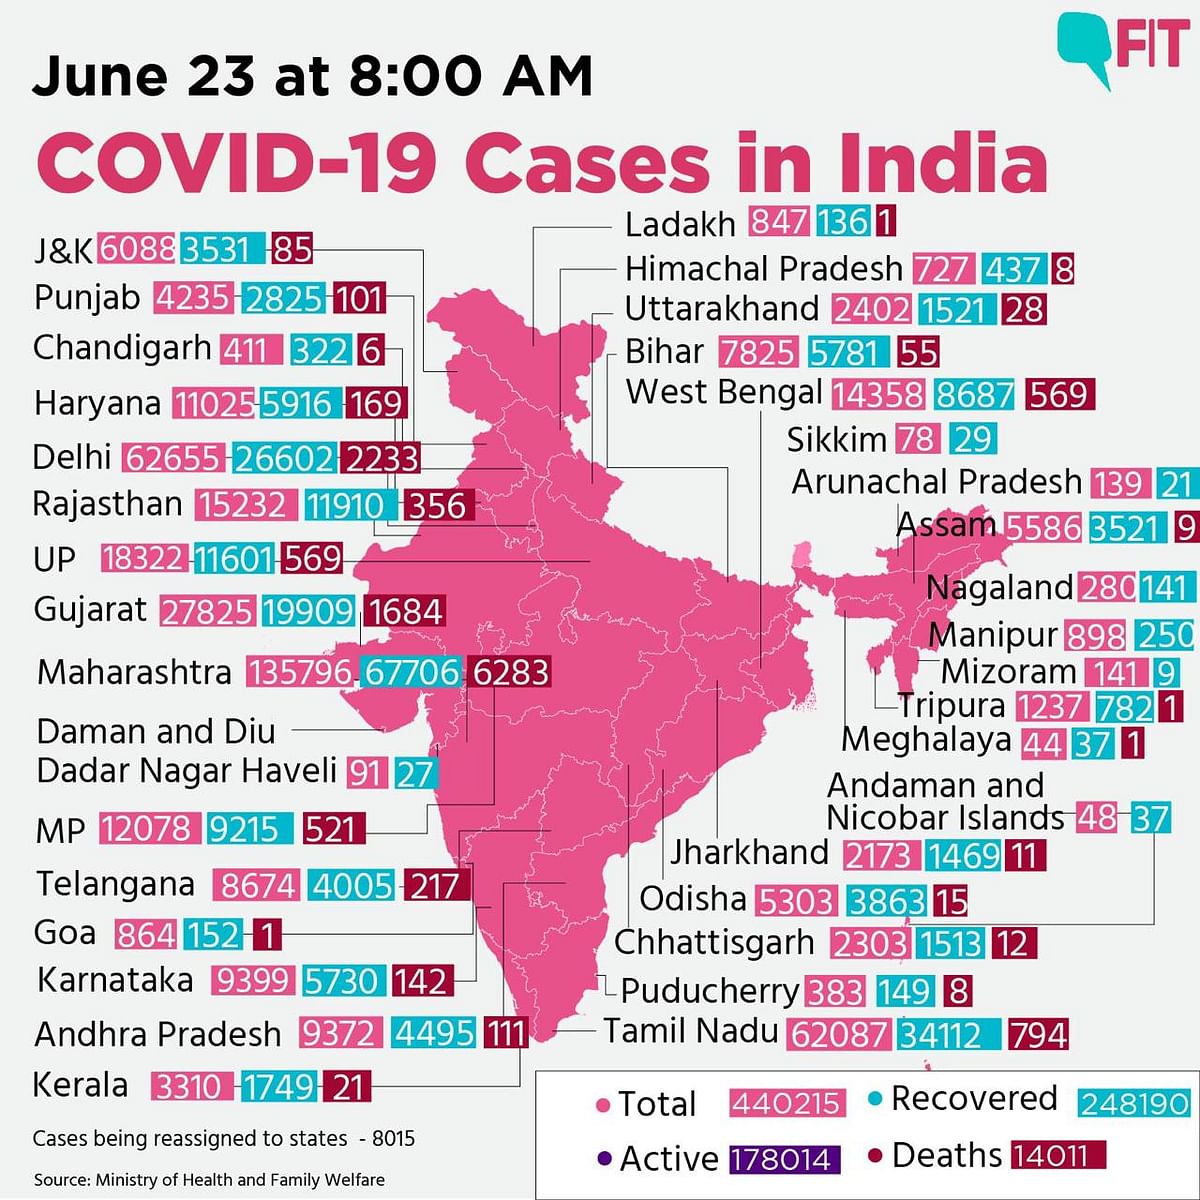 COVID-19 India Update: Nearly 15k New Cases, Deaths Cross 14k Mark